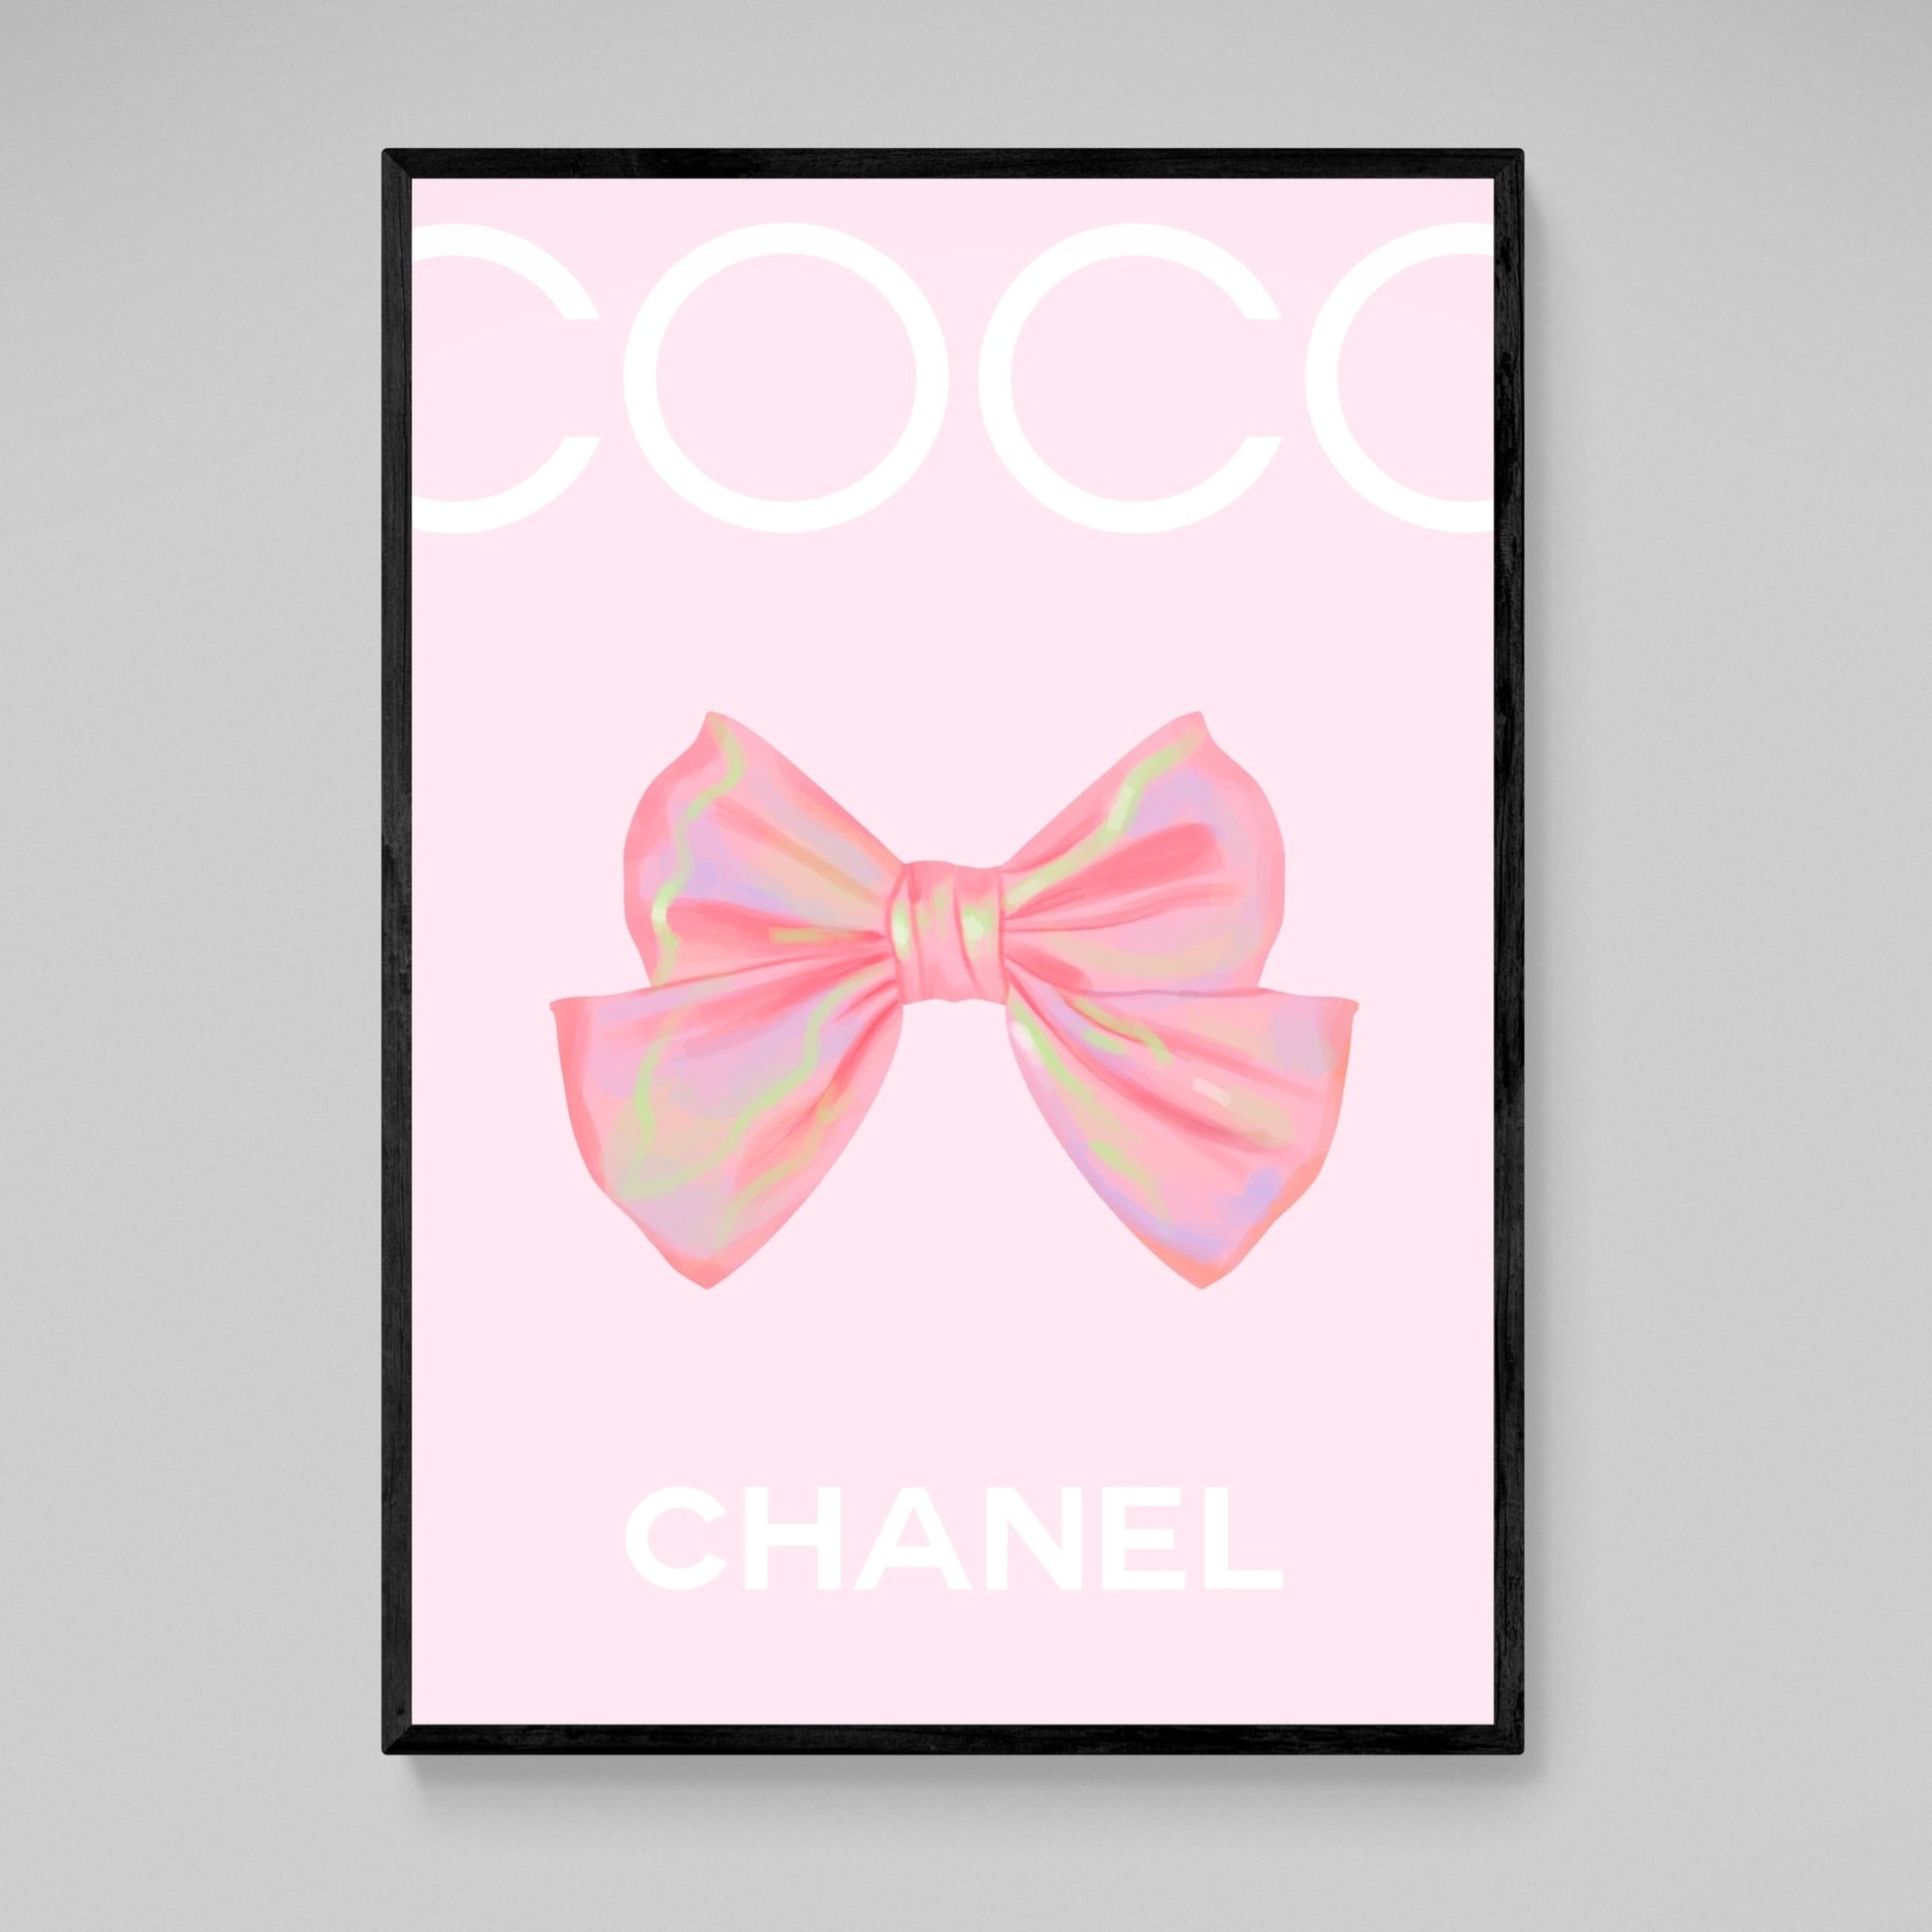 iCanvas Coco Chanel Art by Art Mirano Canvas Art Wall Decor ( People > celebrities > Models & Fashion Icons art) - 12x18 in